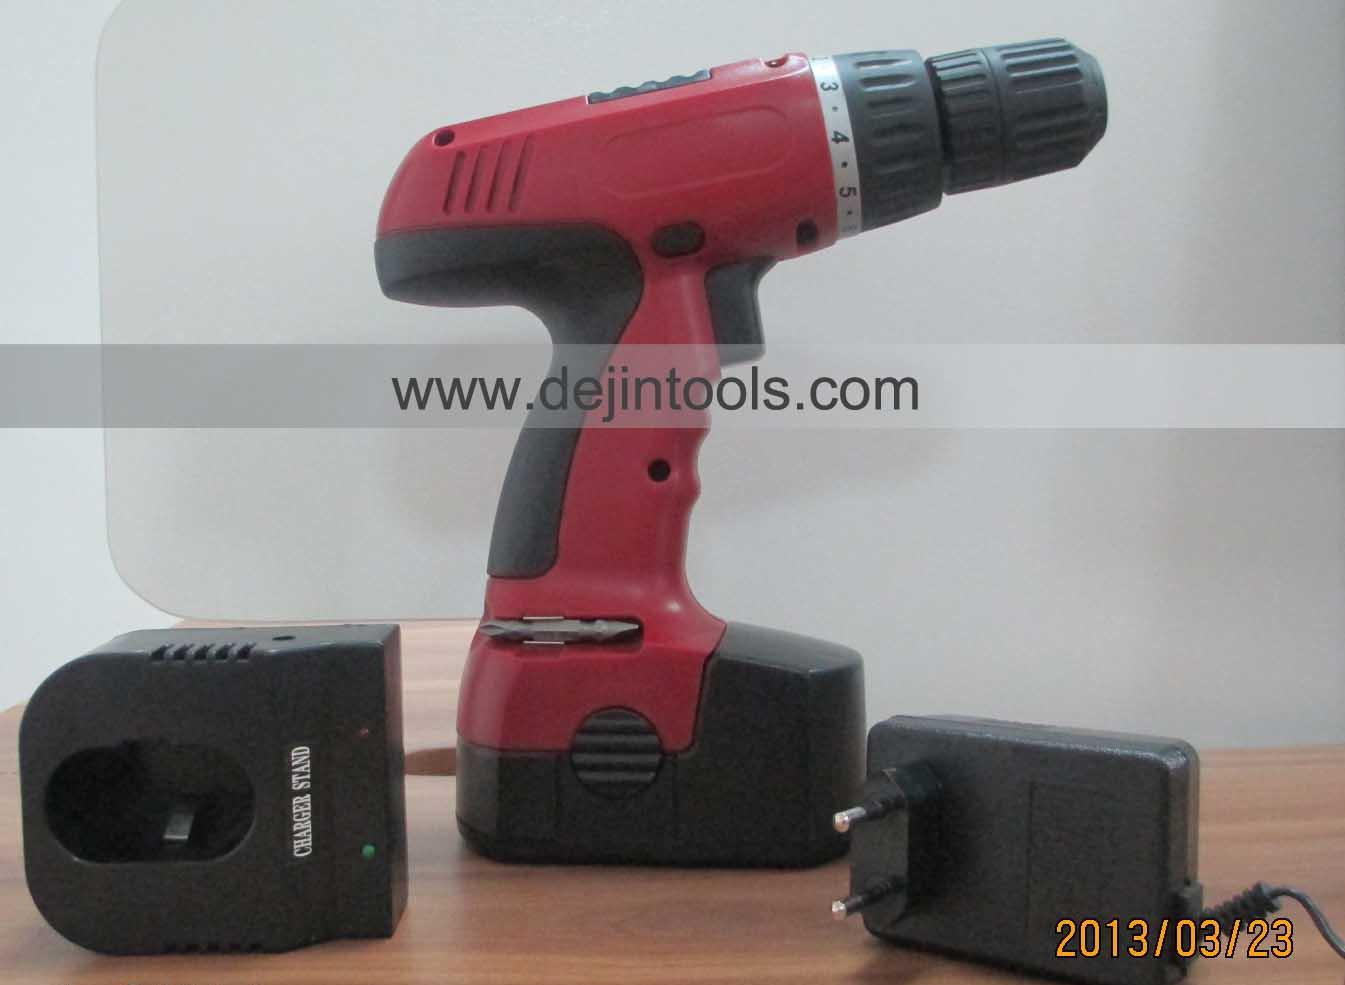 7.2V-18V 10mm Cordless Drill Set of Power Tools with RoHS GS